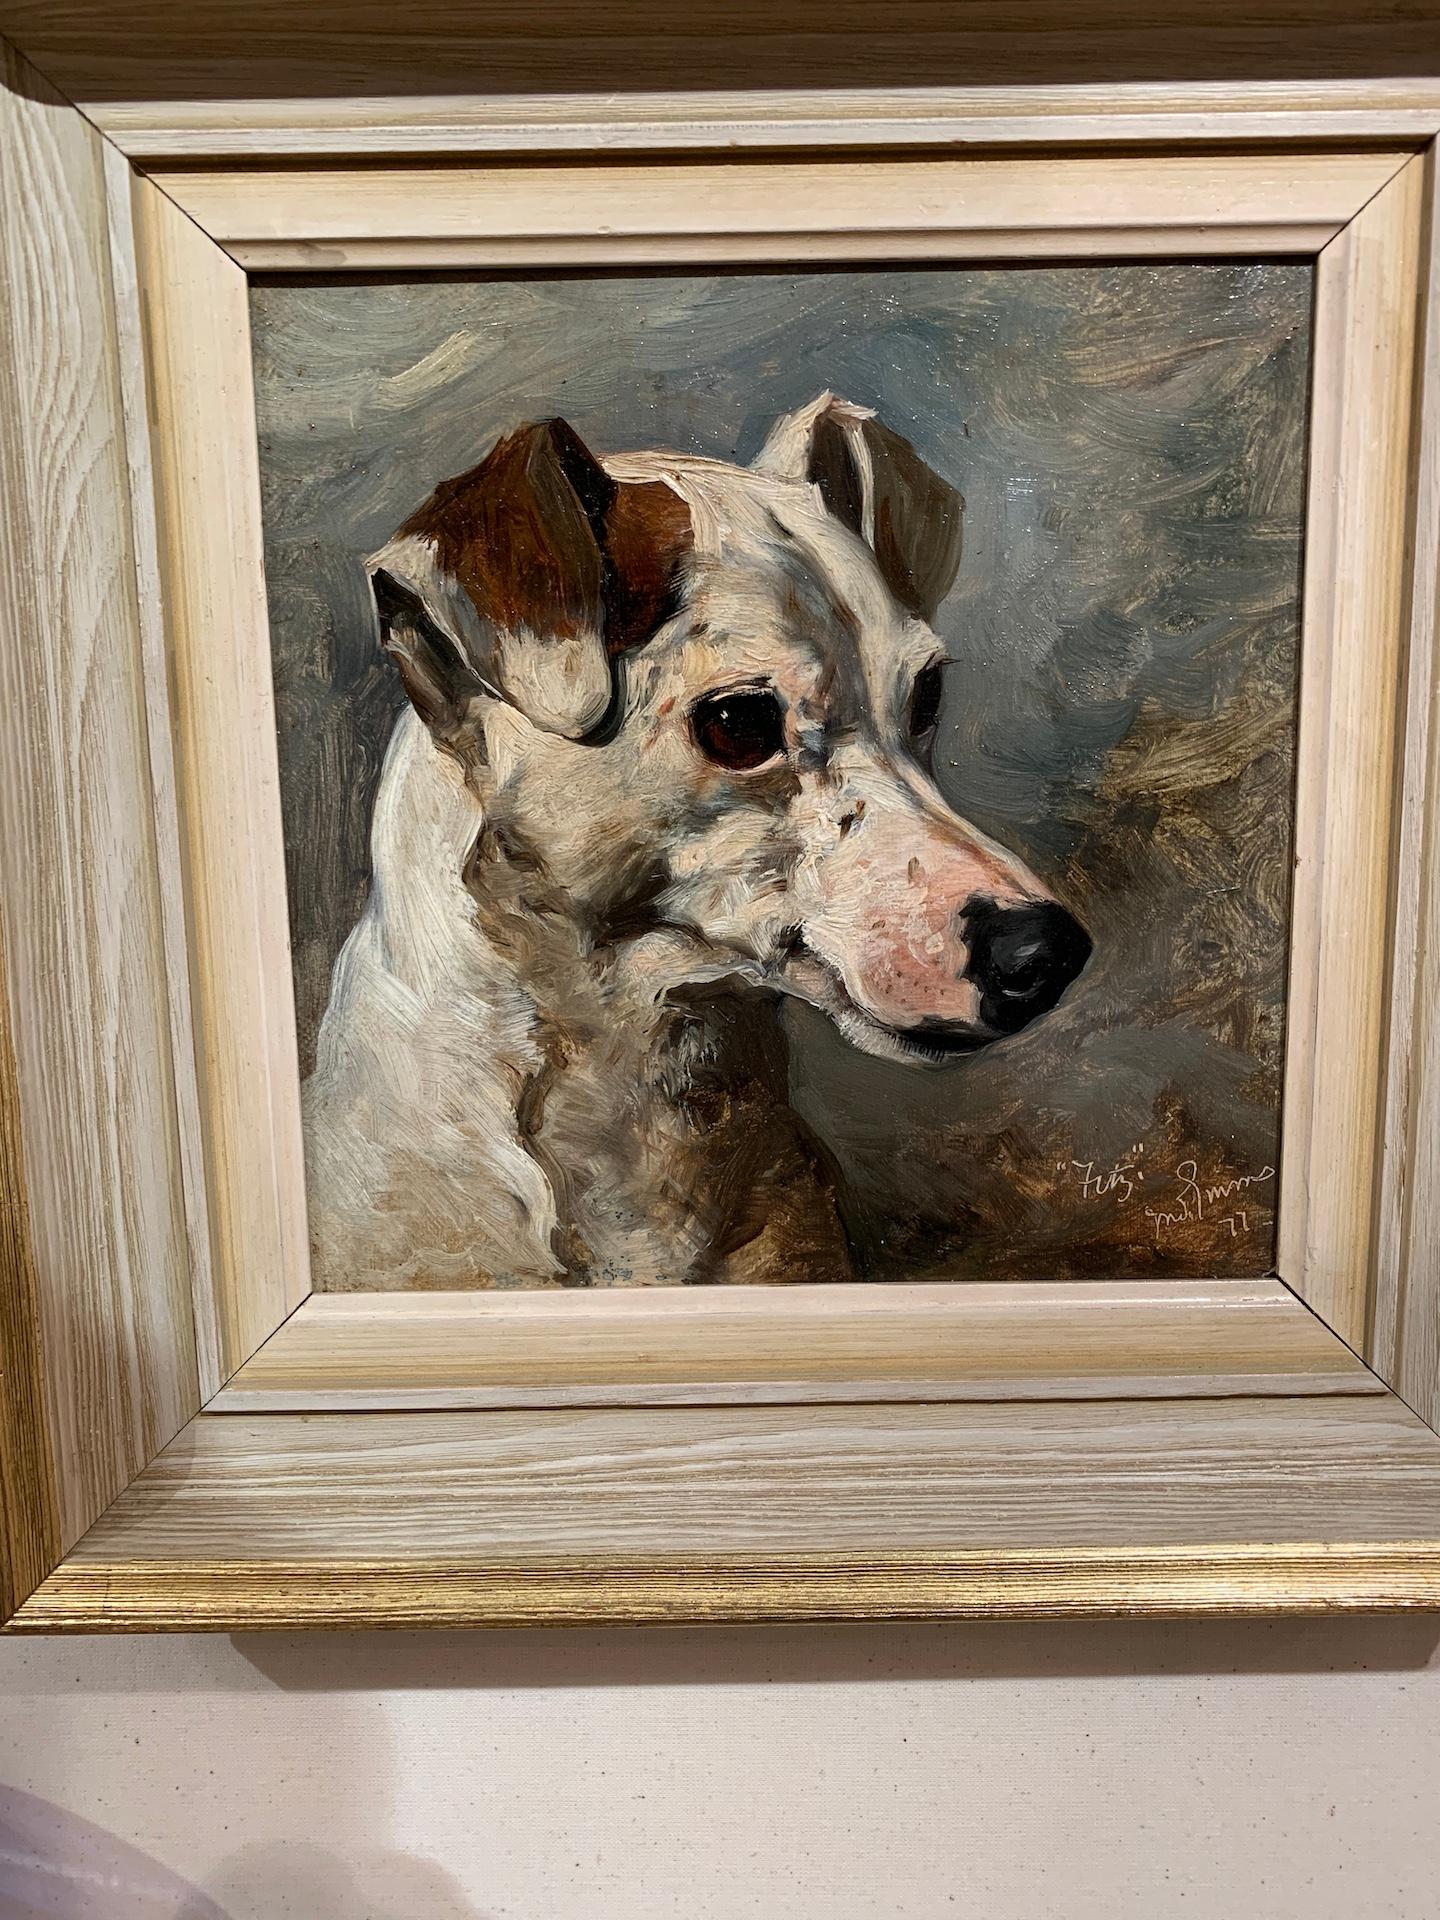 Late 19th Century English portrait of an English Jack Russell called Fritz - Painting by John Emms